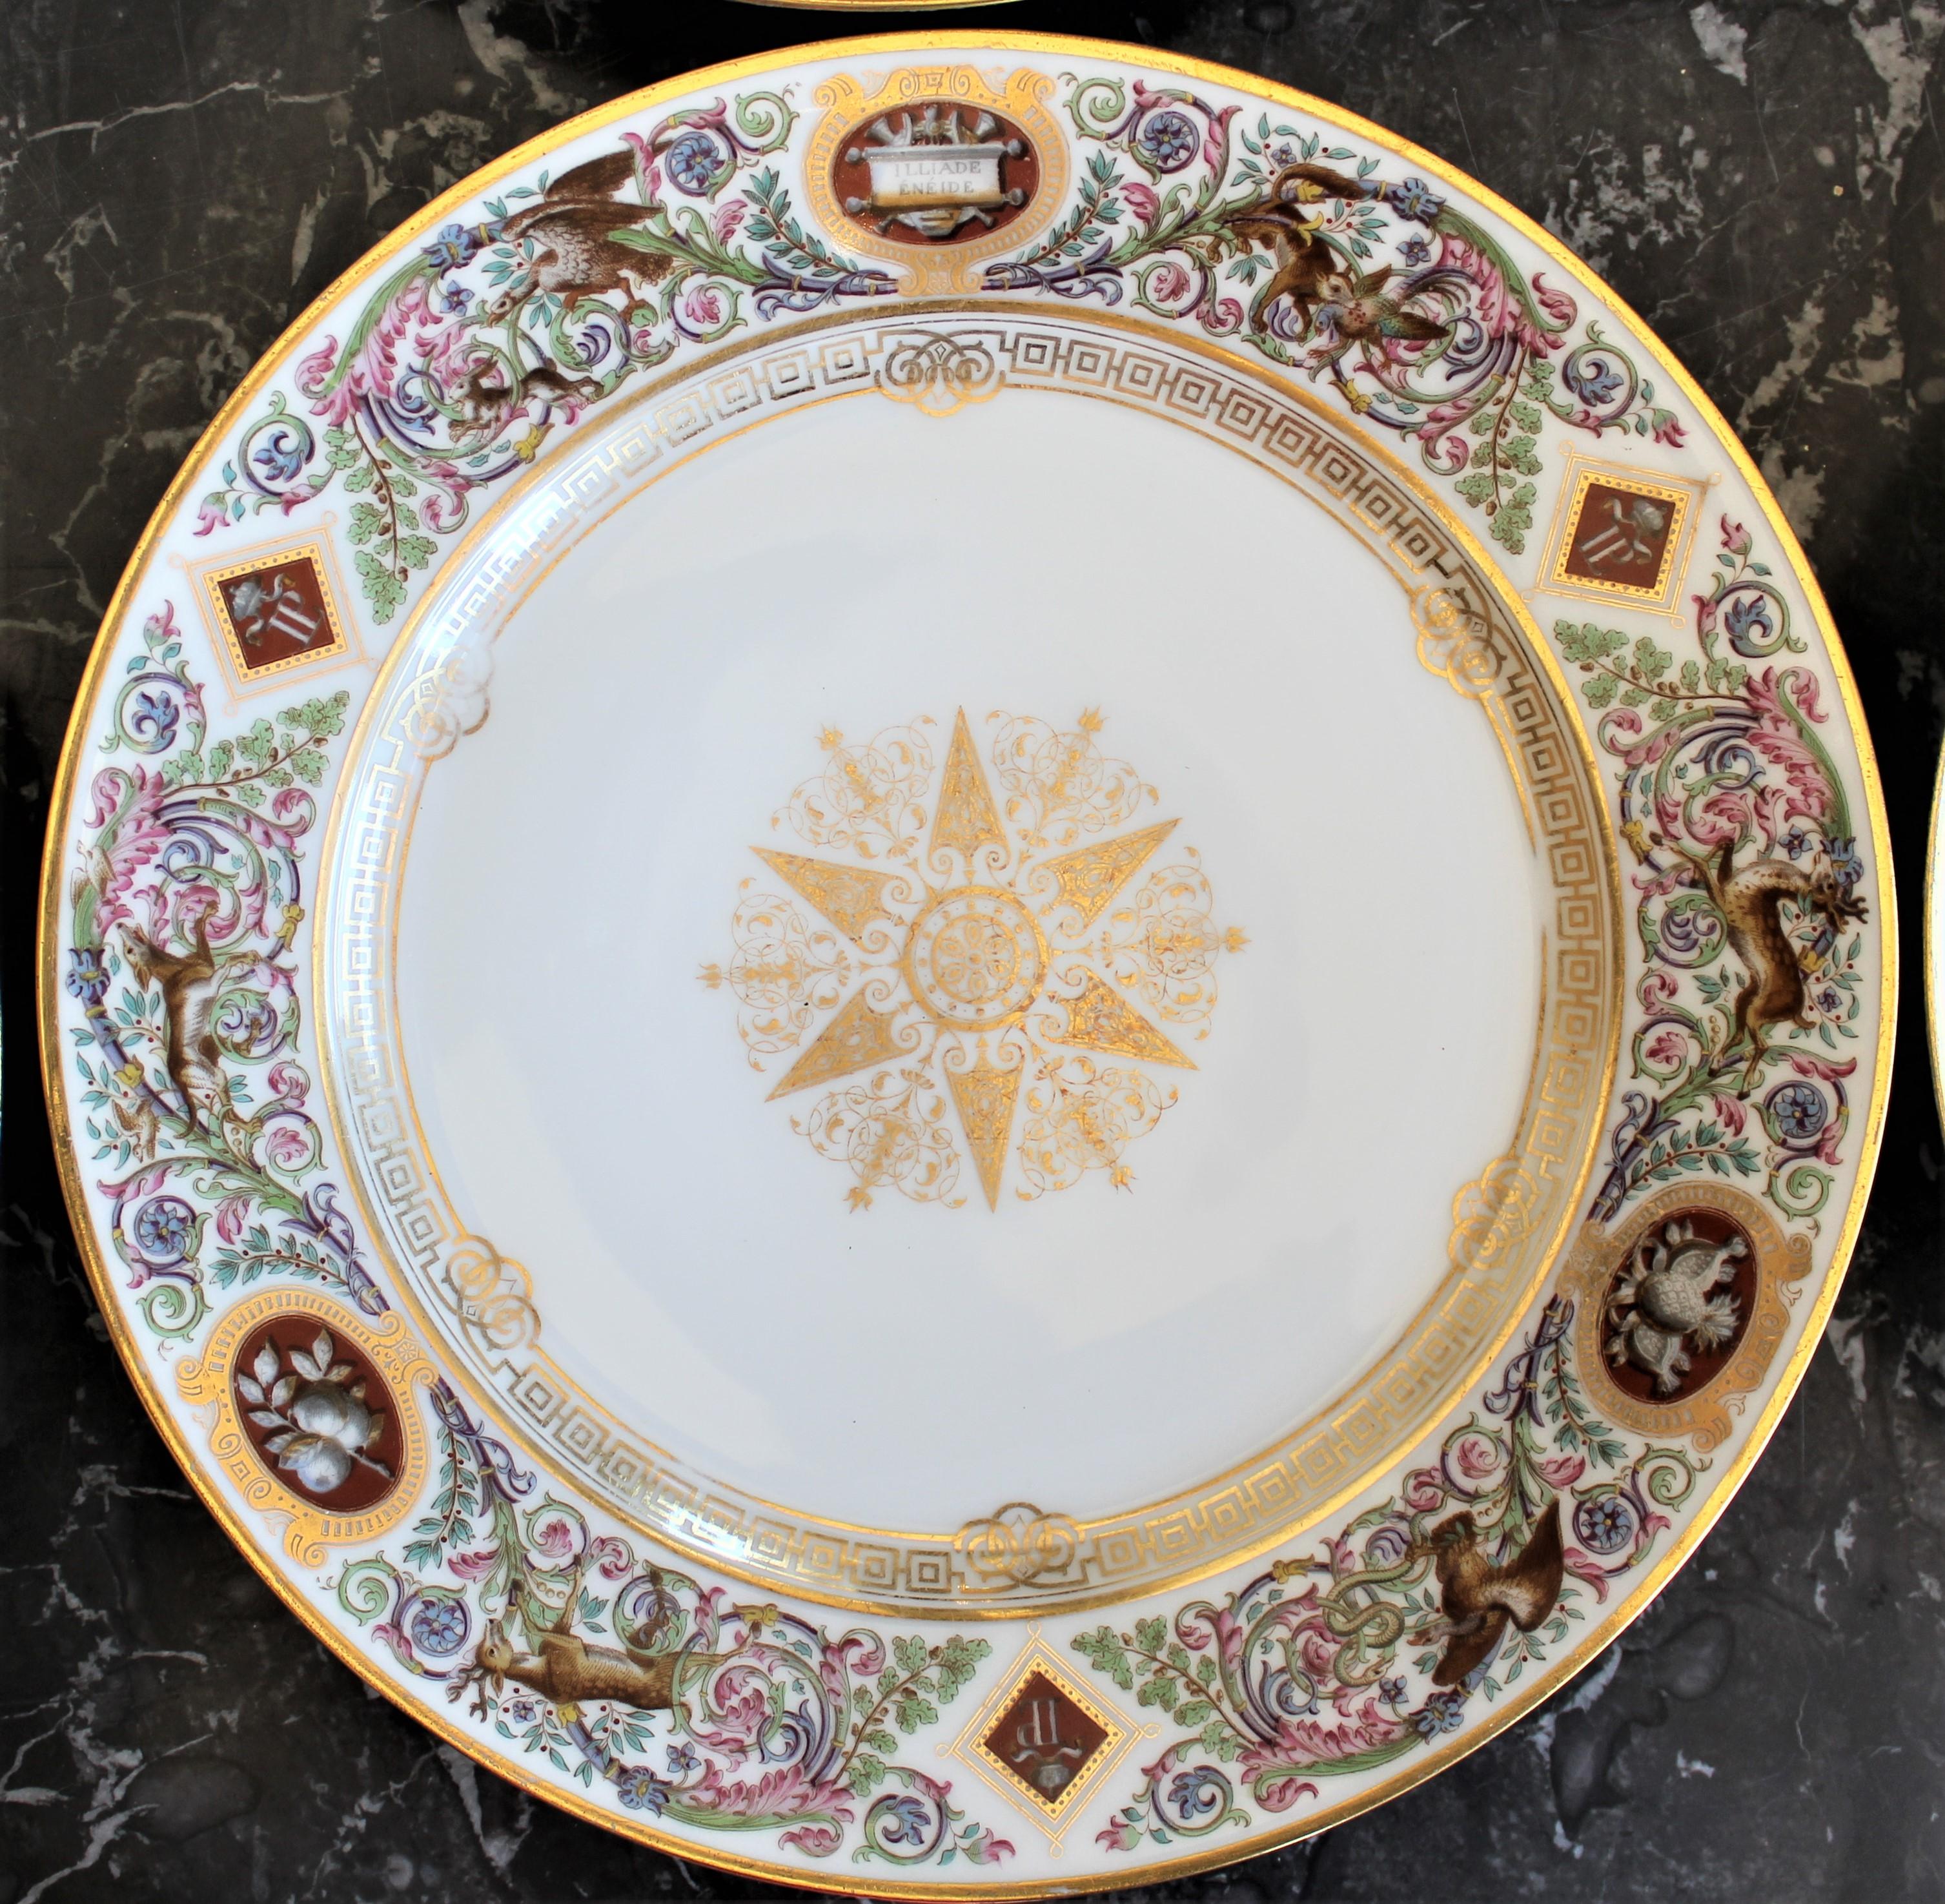  Sevres Chateau de Fountainbleu Pattern French Dinner or Cabinet Plates: 6 8